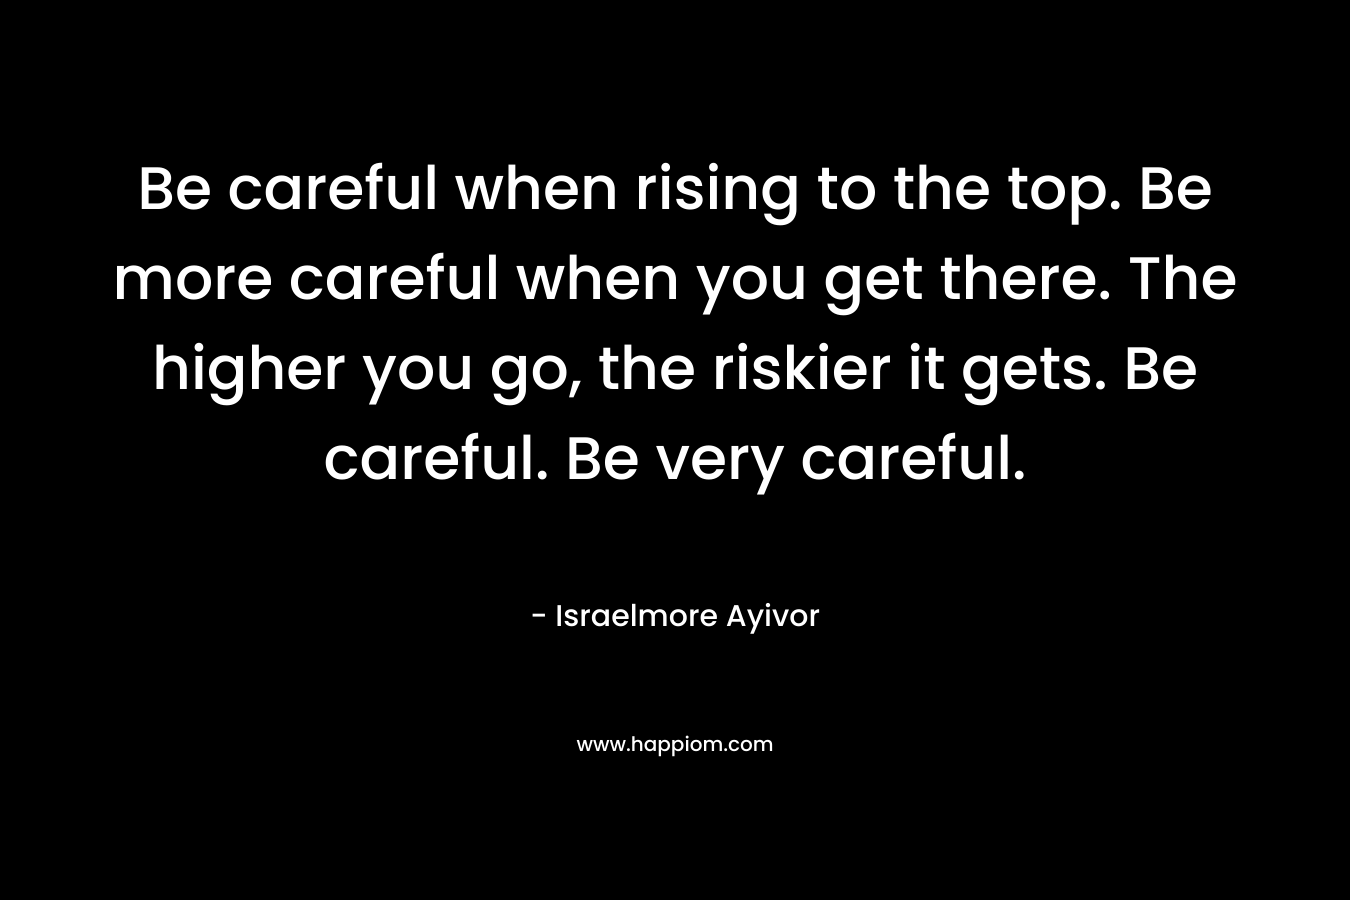 Be careful when rising to the top. Be more careful when you get there. The higher you go, the riskier it gets. Be careful. Be very careful.